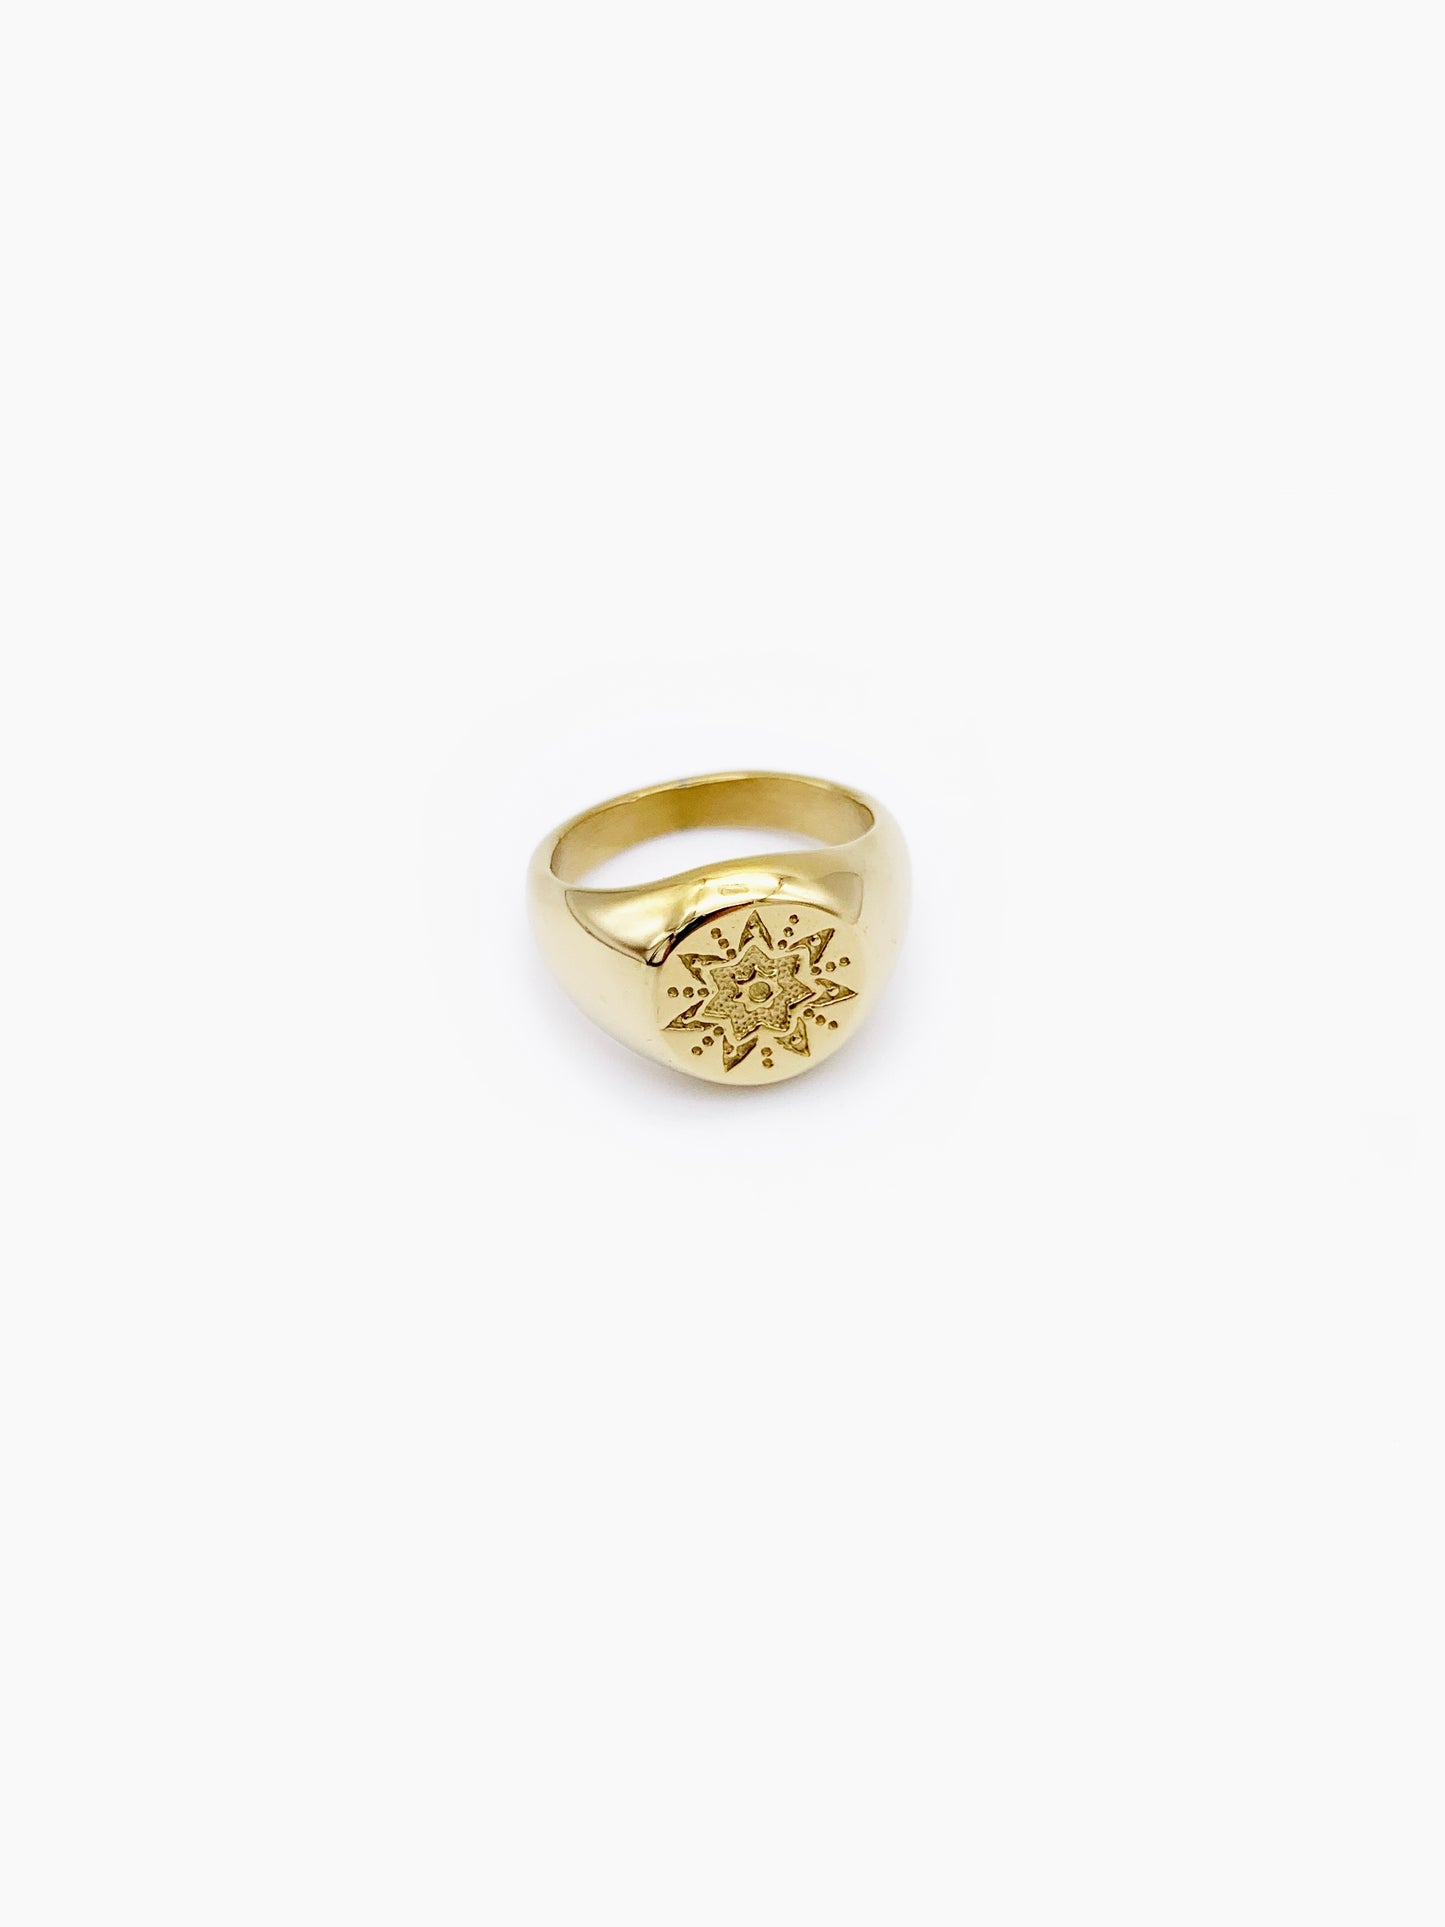 STAR RING STEEL GOLDPLATED